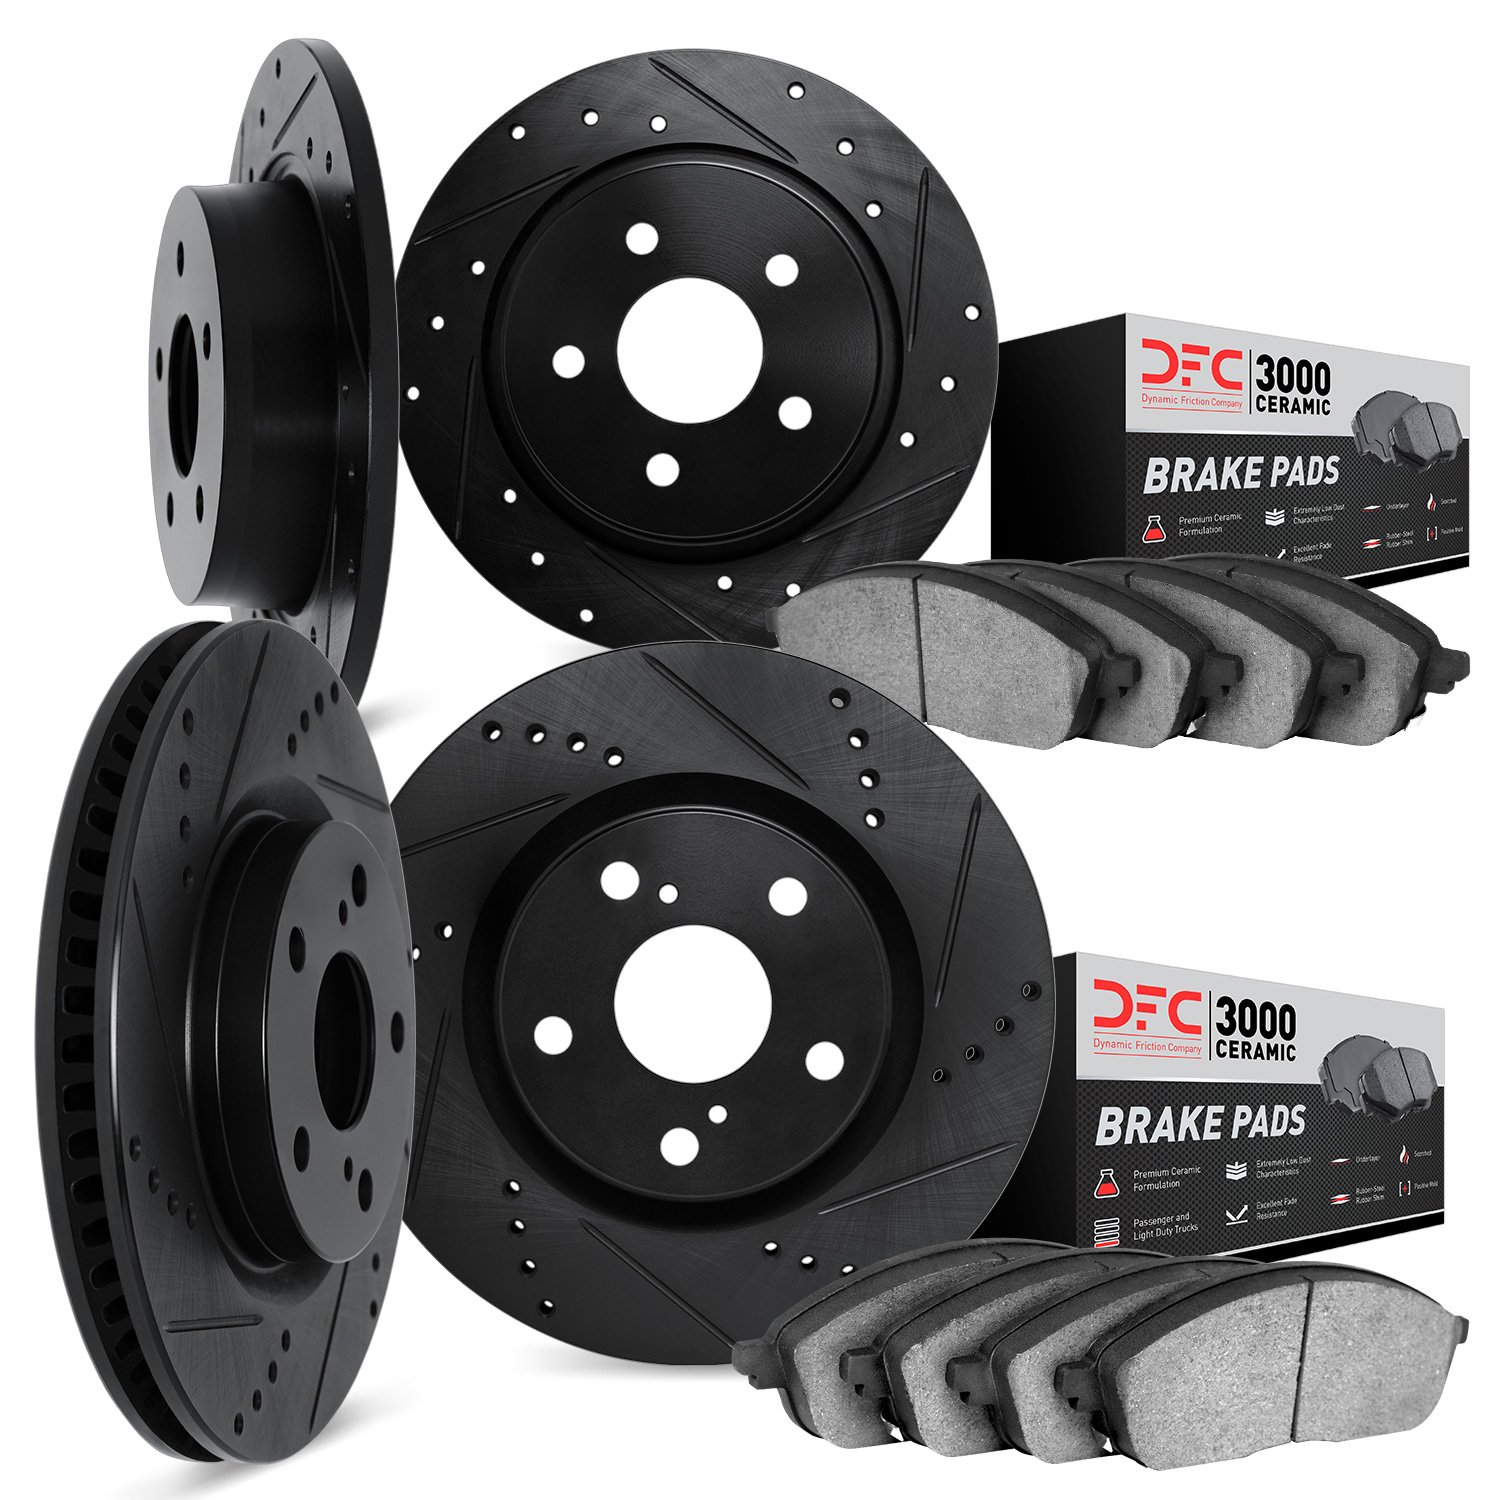 8304-42002 Drilled/Slotted Brake Rotors with 3000-Series Ceramic Brake Pads Kit [Black], 1993-1998 Mopar, Position: Front and Re